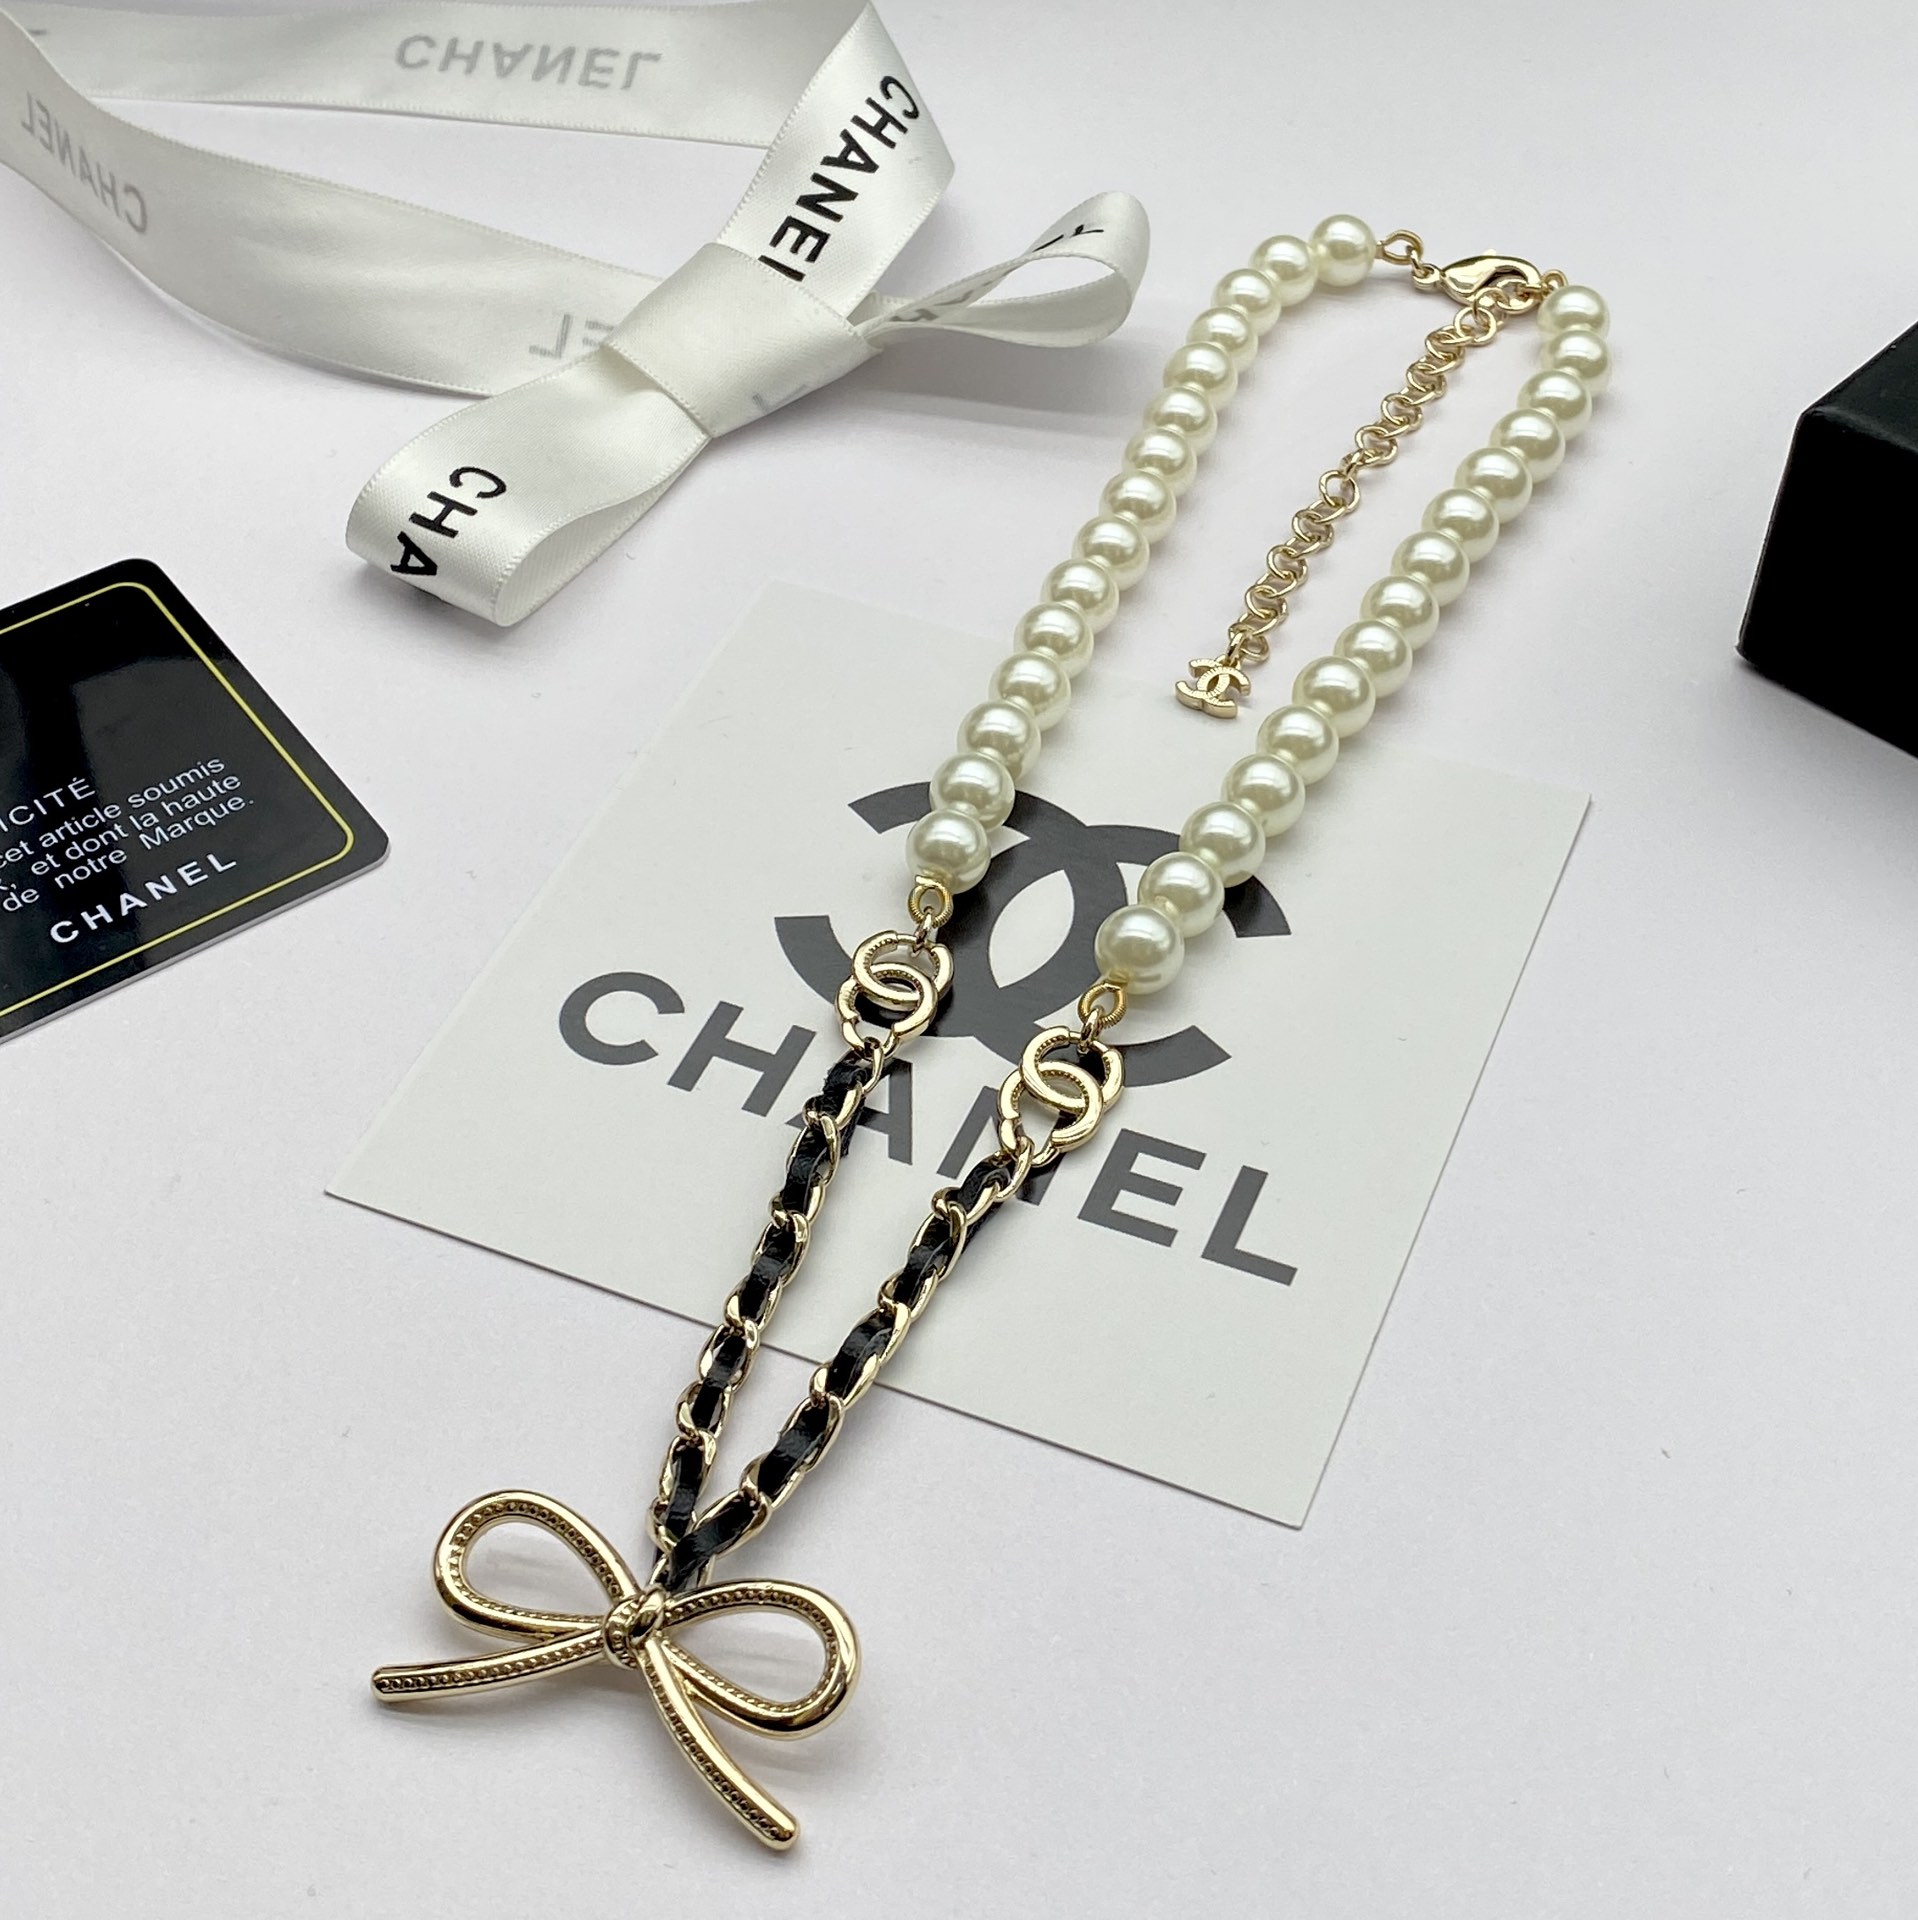 Chanel pearl chain necklace